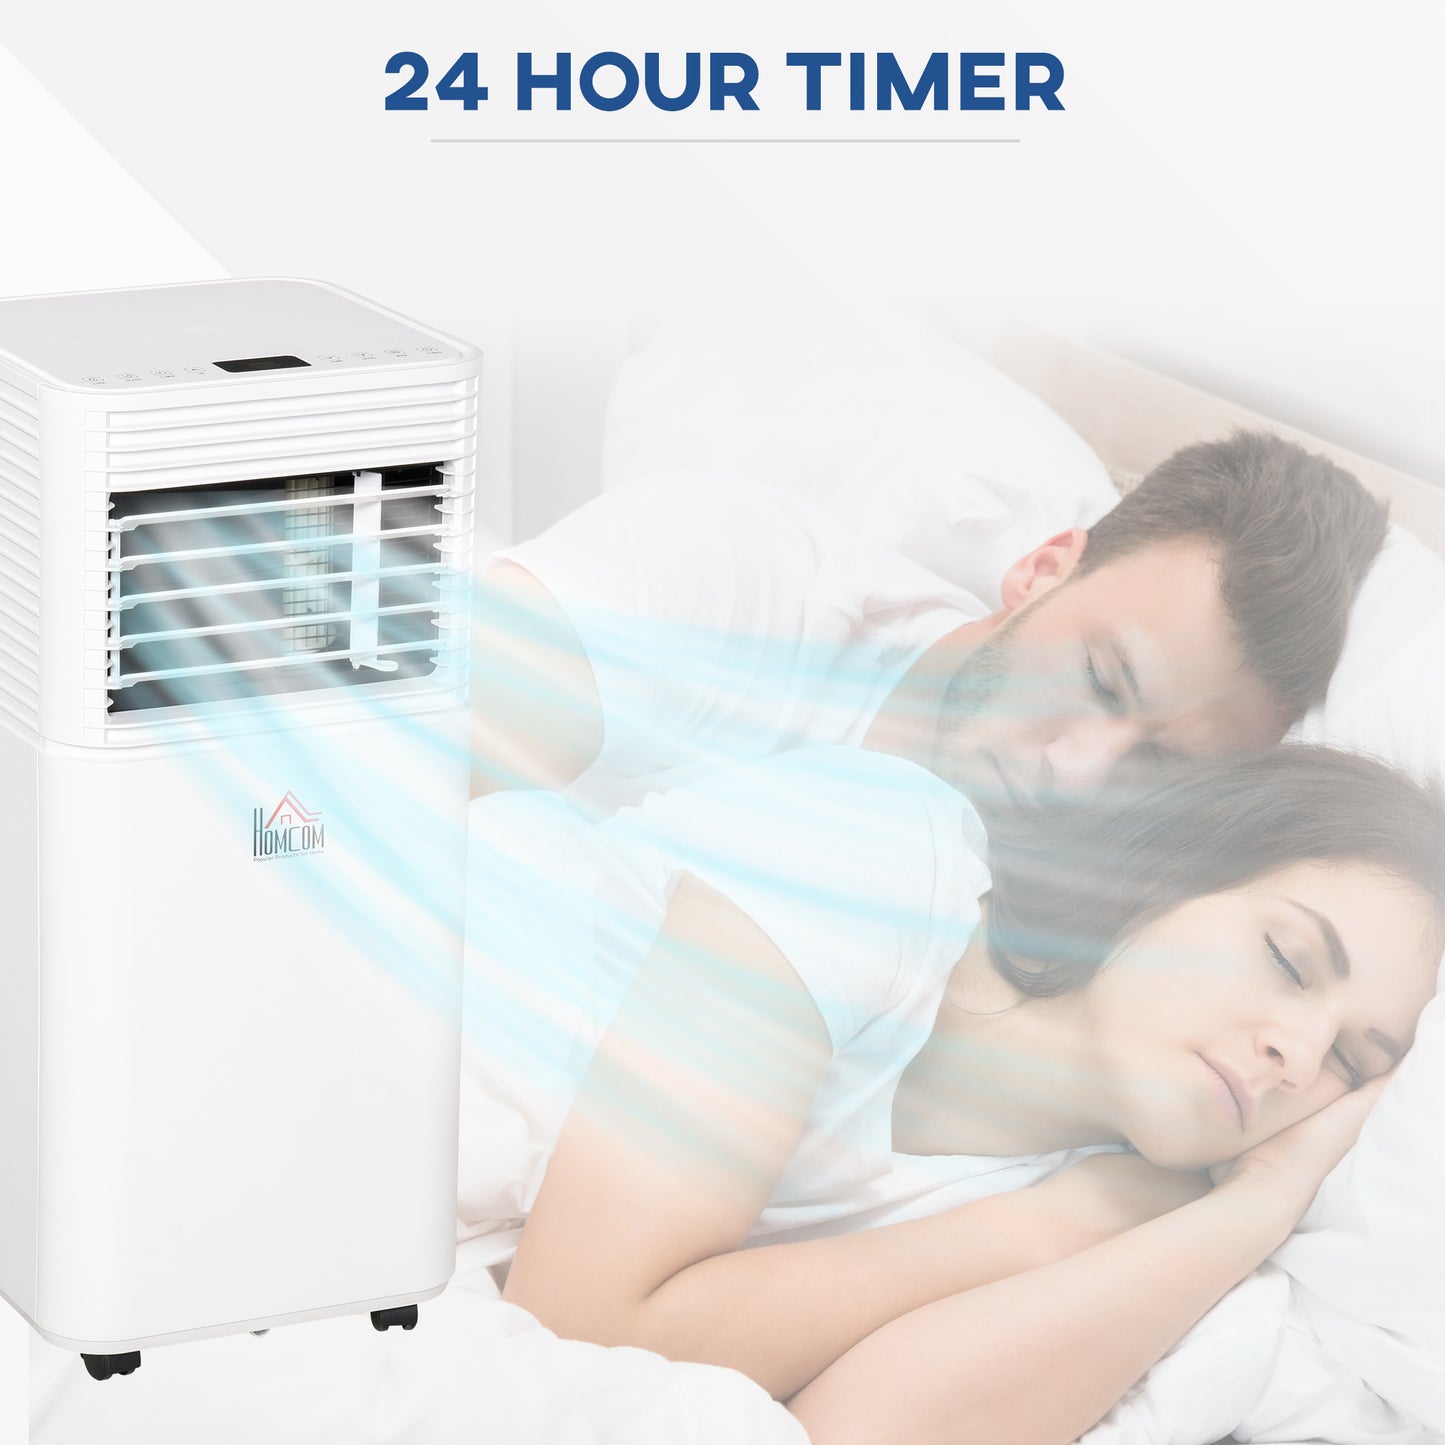 HOMCOM 9000 BTU 4-In-1 Compact Portable Mobile Air Conditioner Unit Cooling Dehumidifying Ventilating w/ Fan Remote LED 24Hr Timer Auto Shut-Down